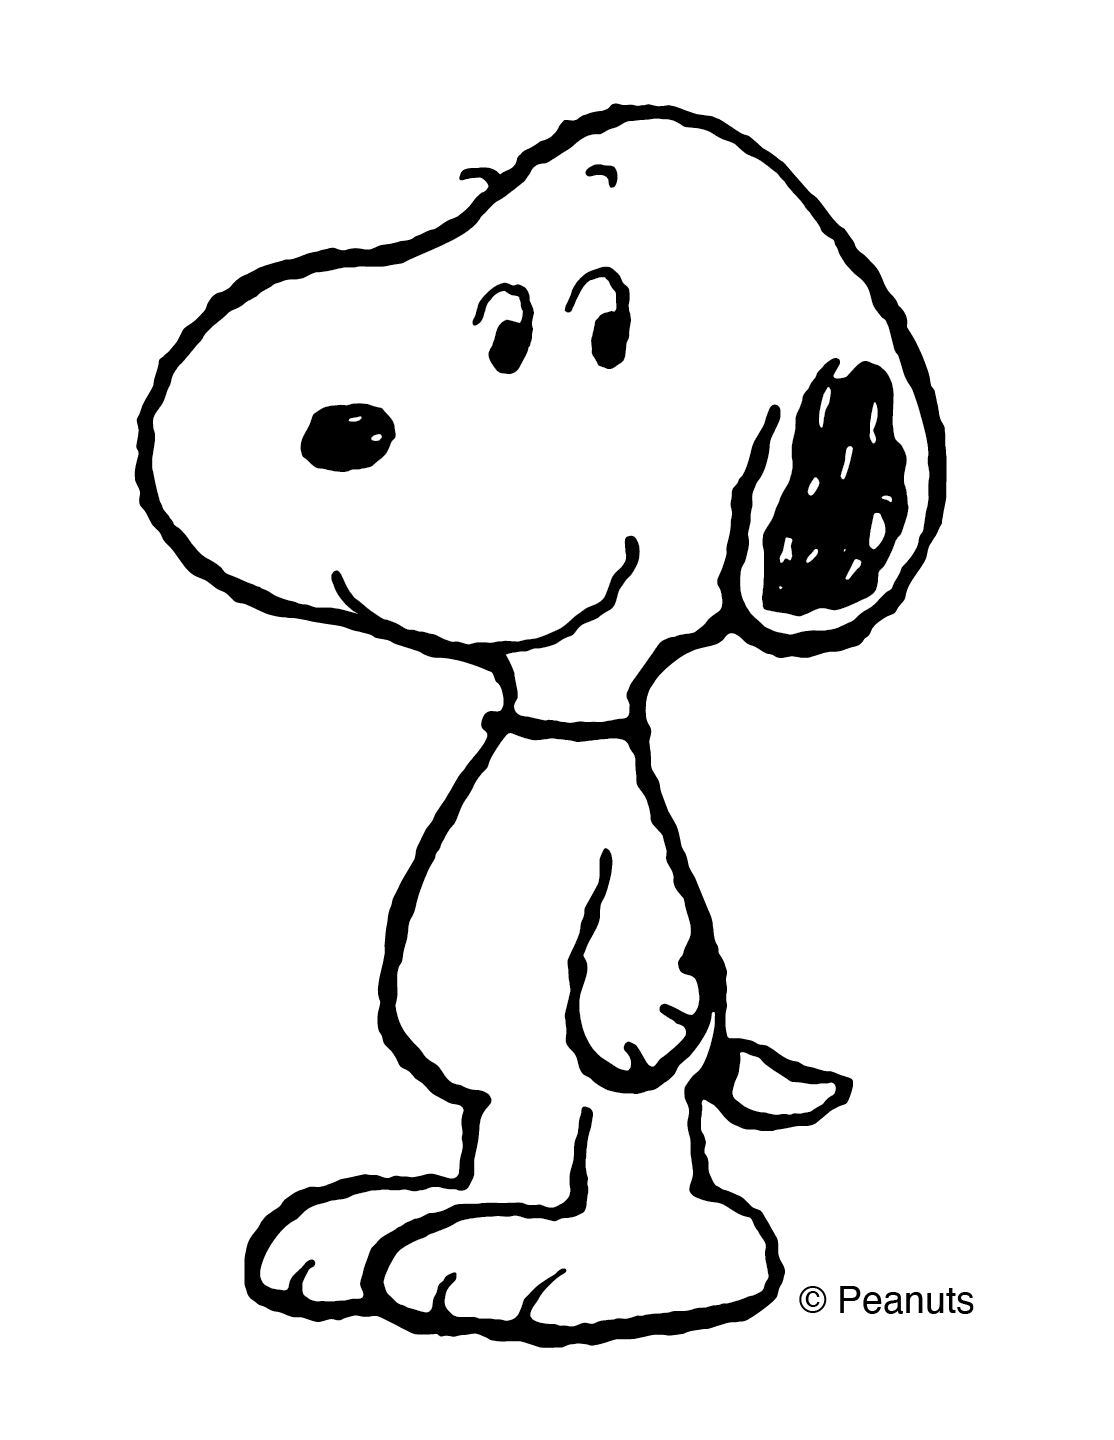 A black and white dog, standing on its back legs, smiling at the viewer.